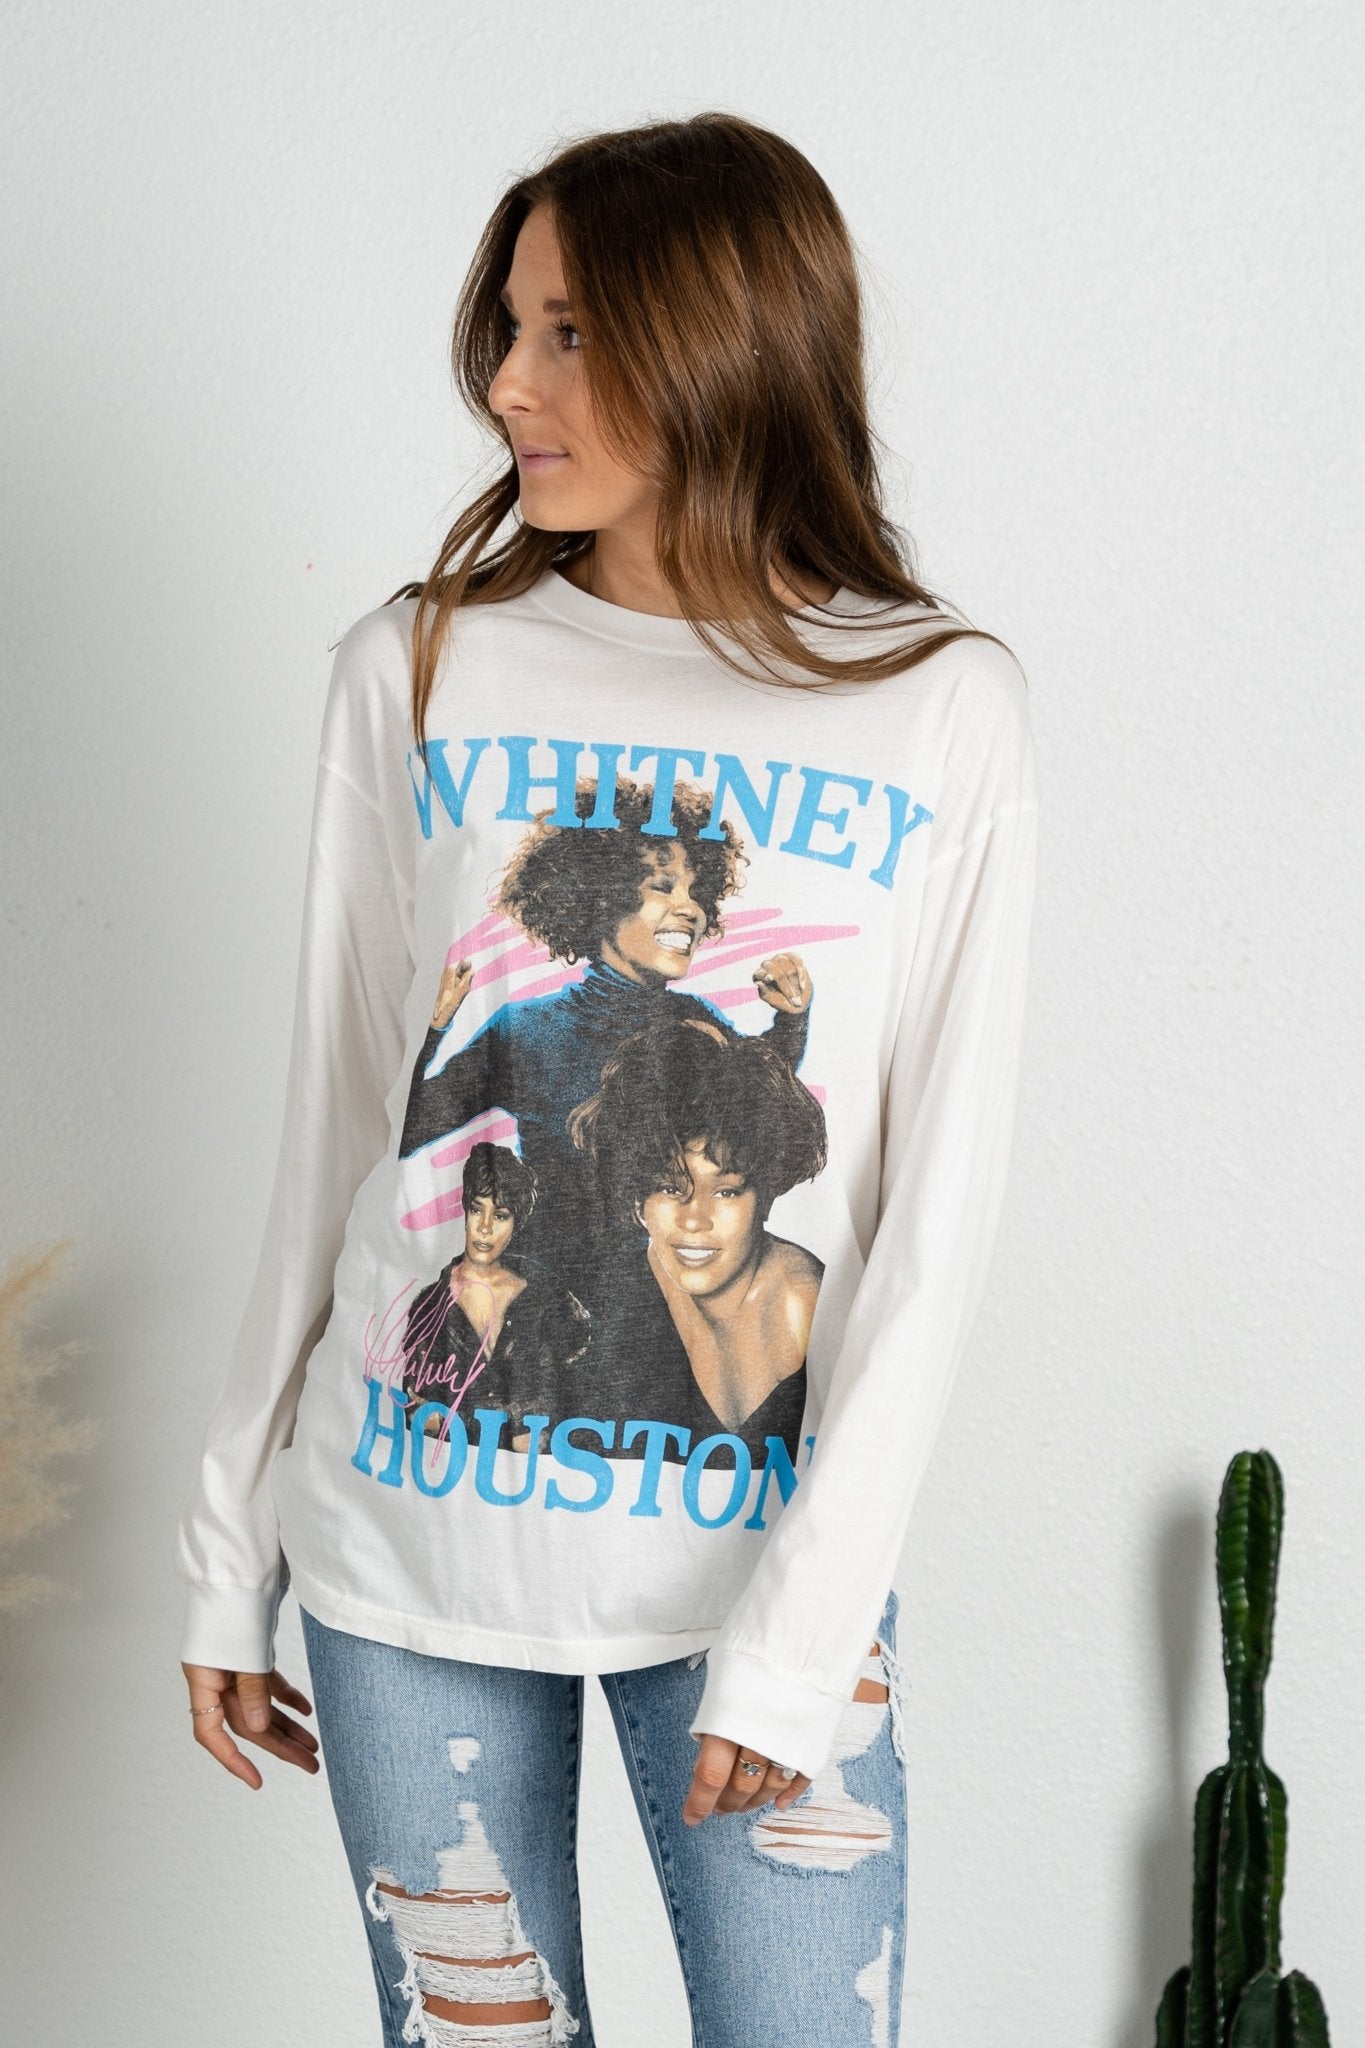 DayDreamer Whitney Houston dance long sleeve tee vintage white - DayDreamer Graphic Band Tees at Lush Fashion Lounge Trendy Boutique in Oklahoma City